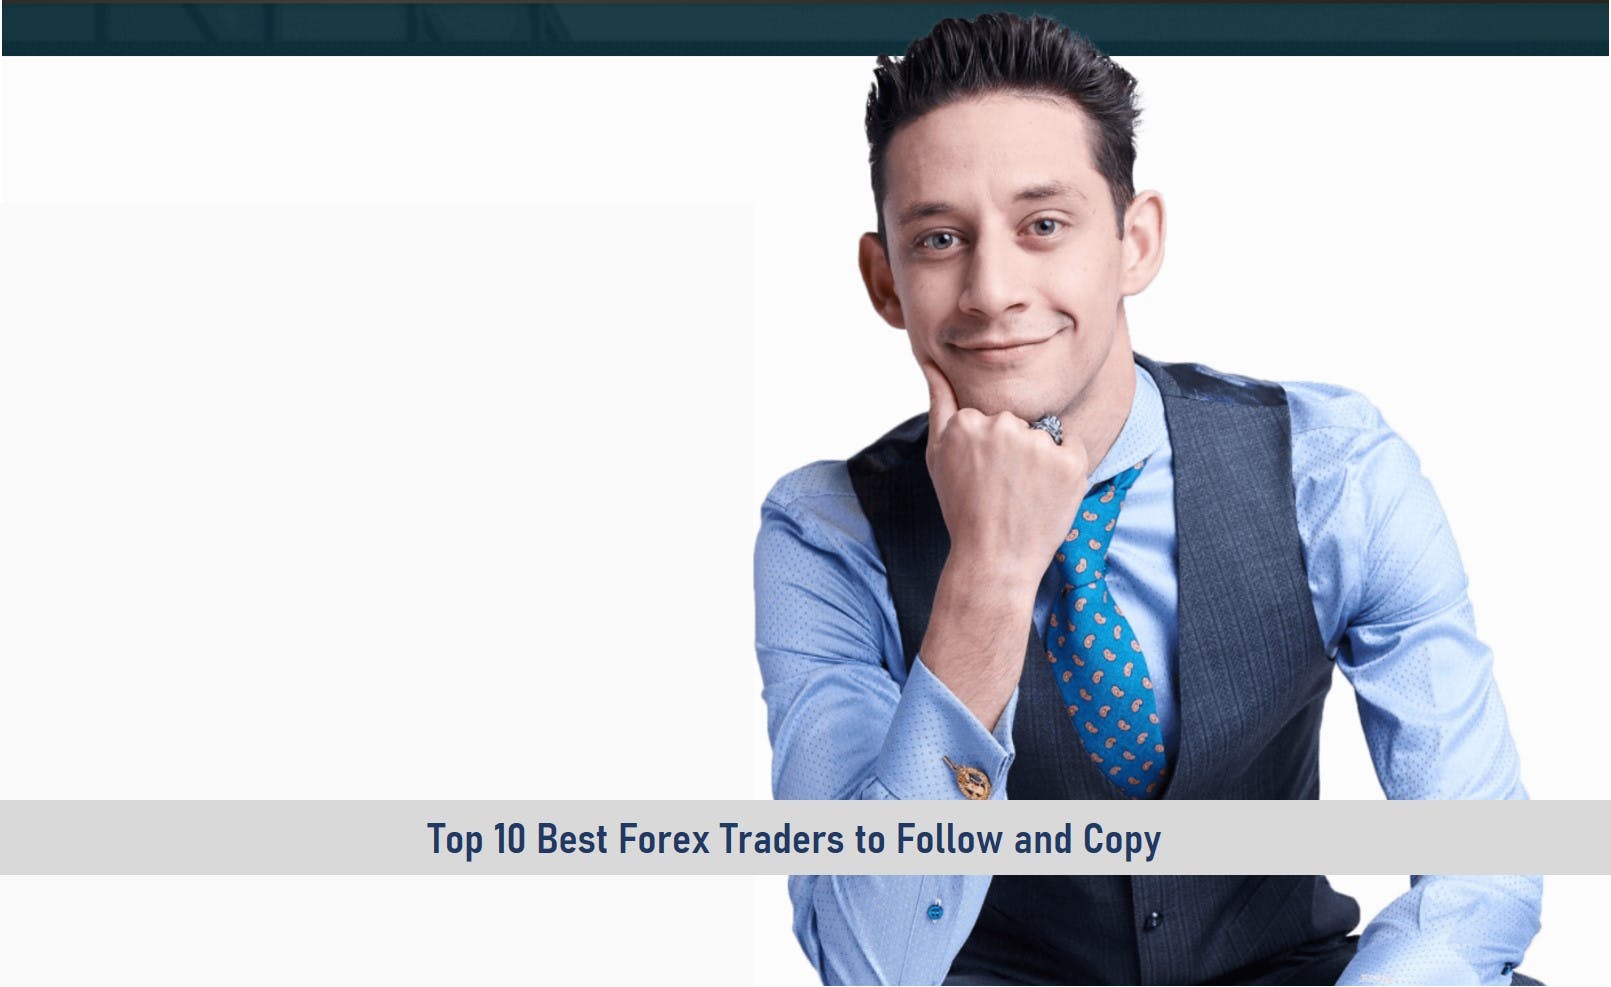 Top 10 Best Forex Traders to Follow and Copy